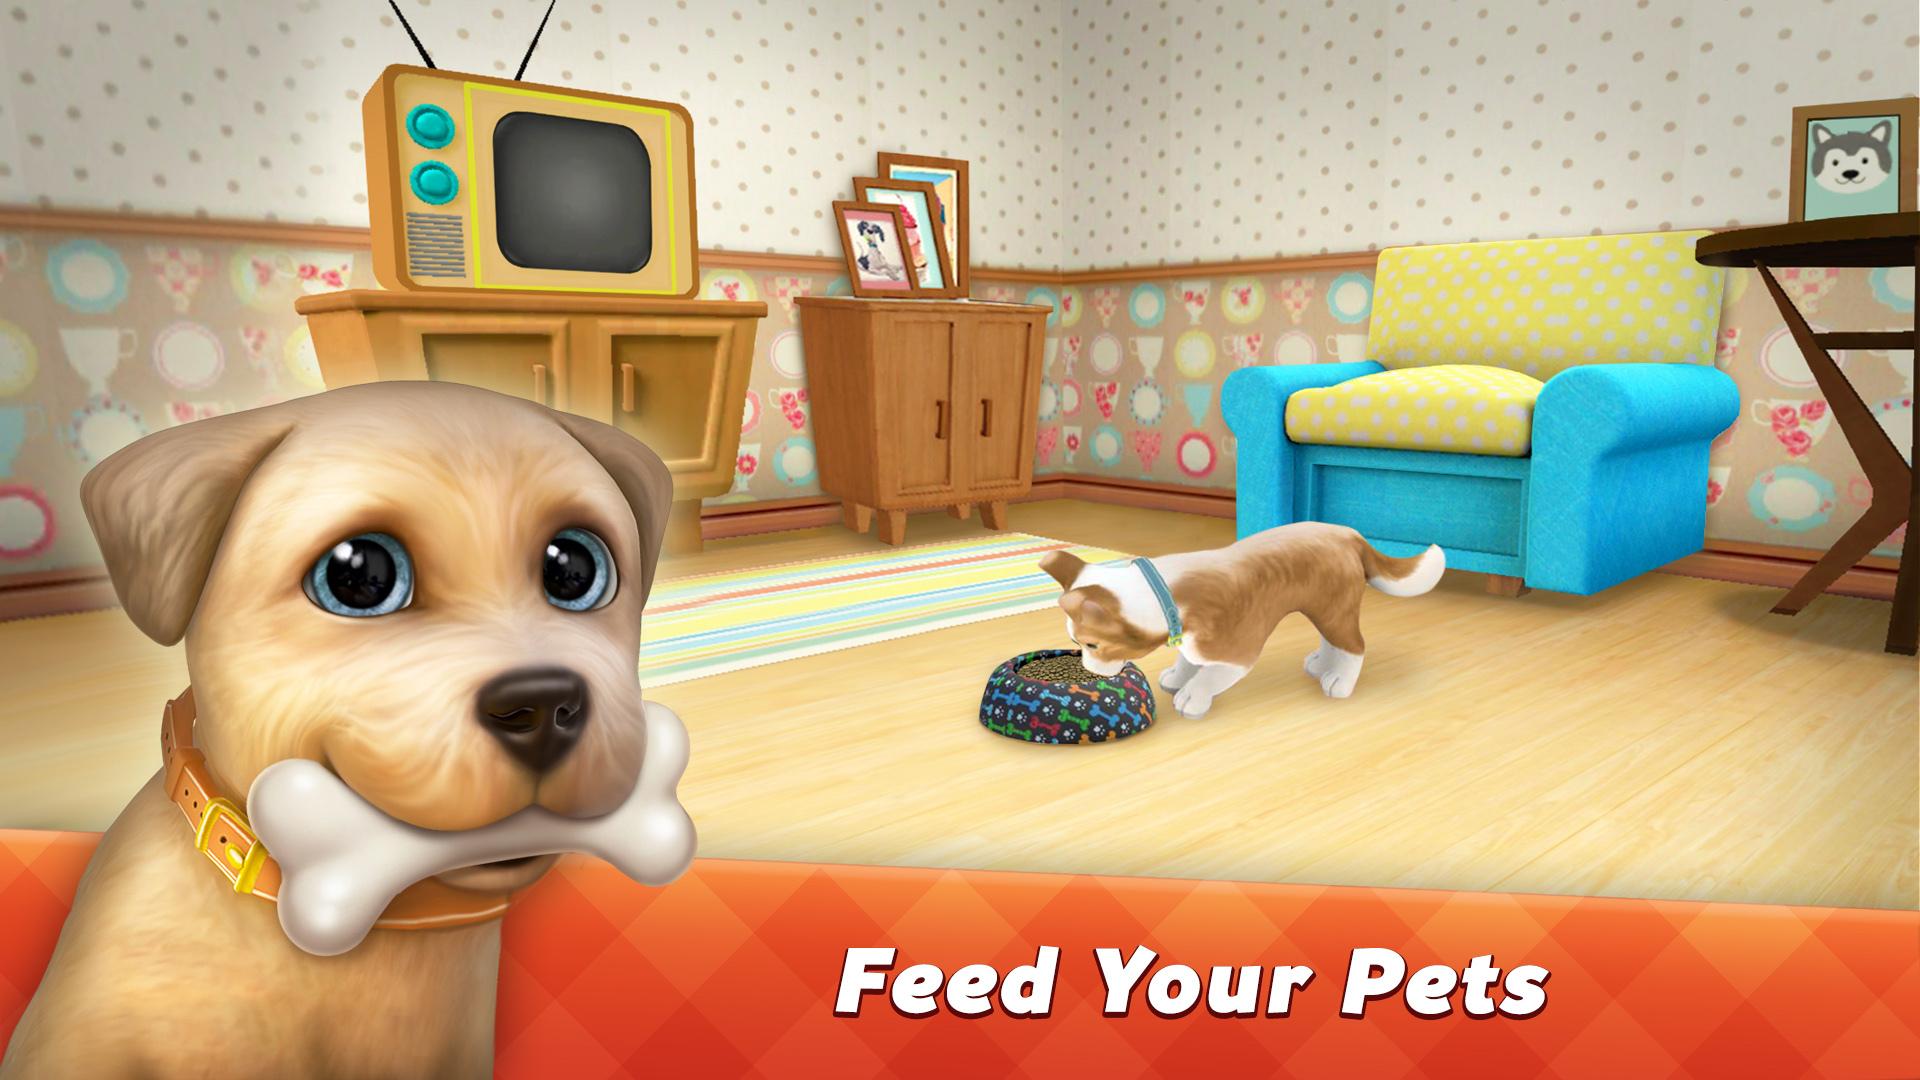 Dog Town Pet Shop Game, Care & Play Dog Games for Android